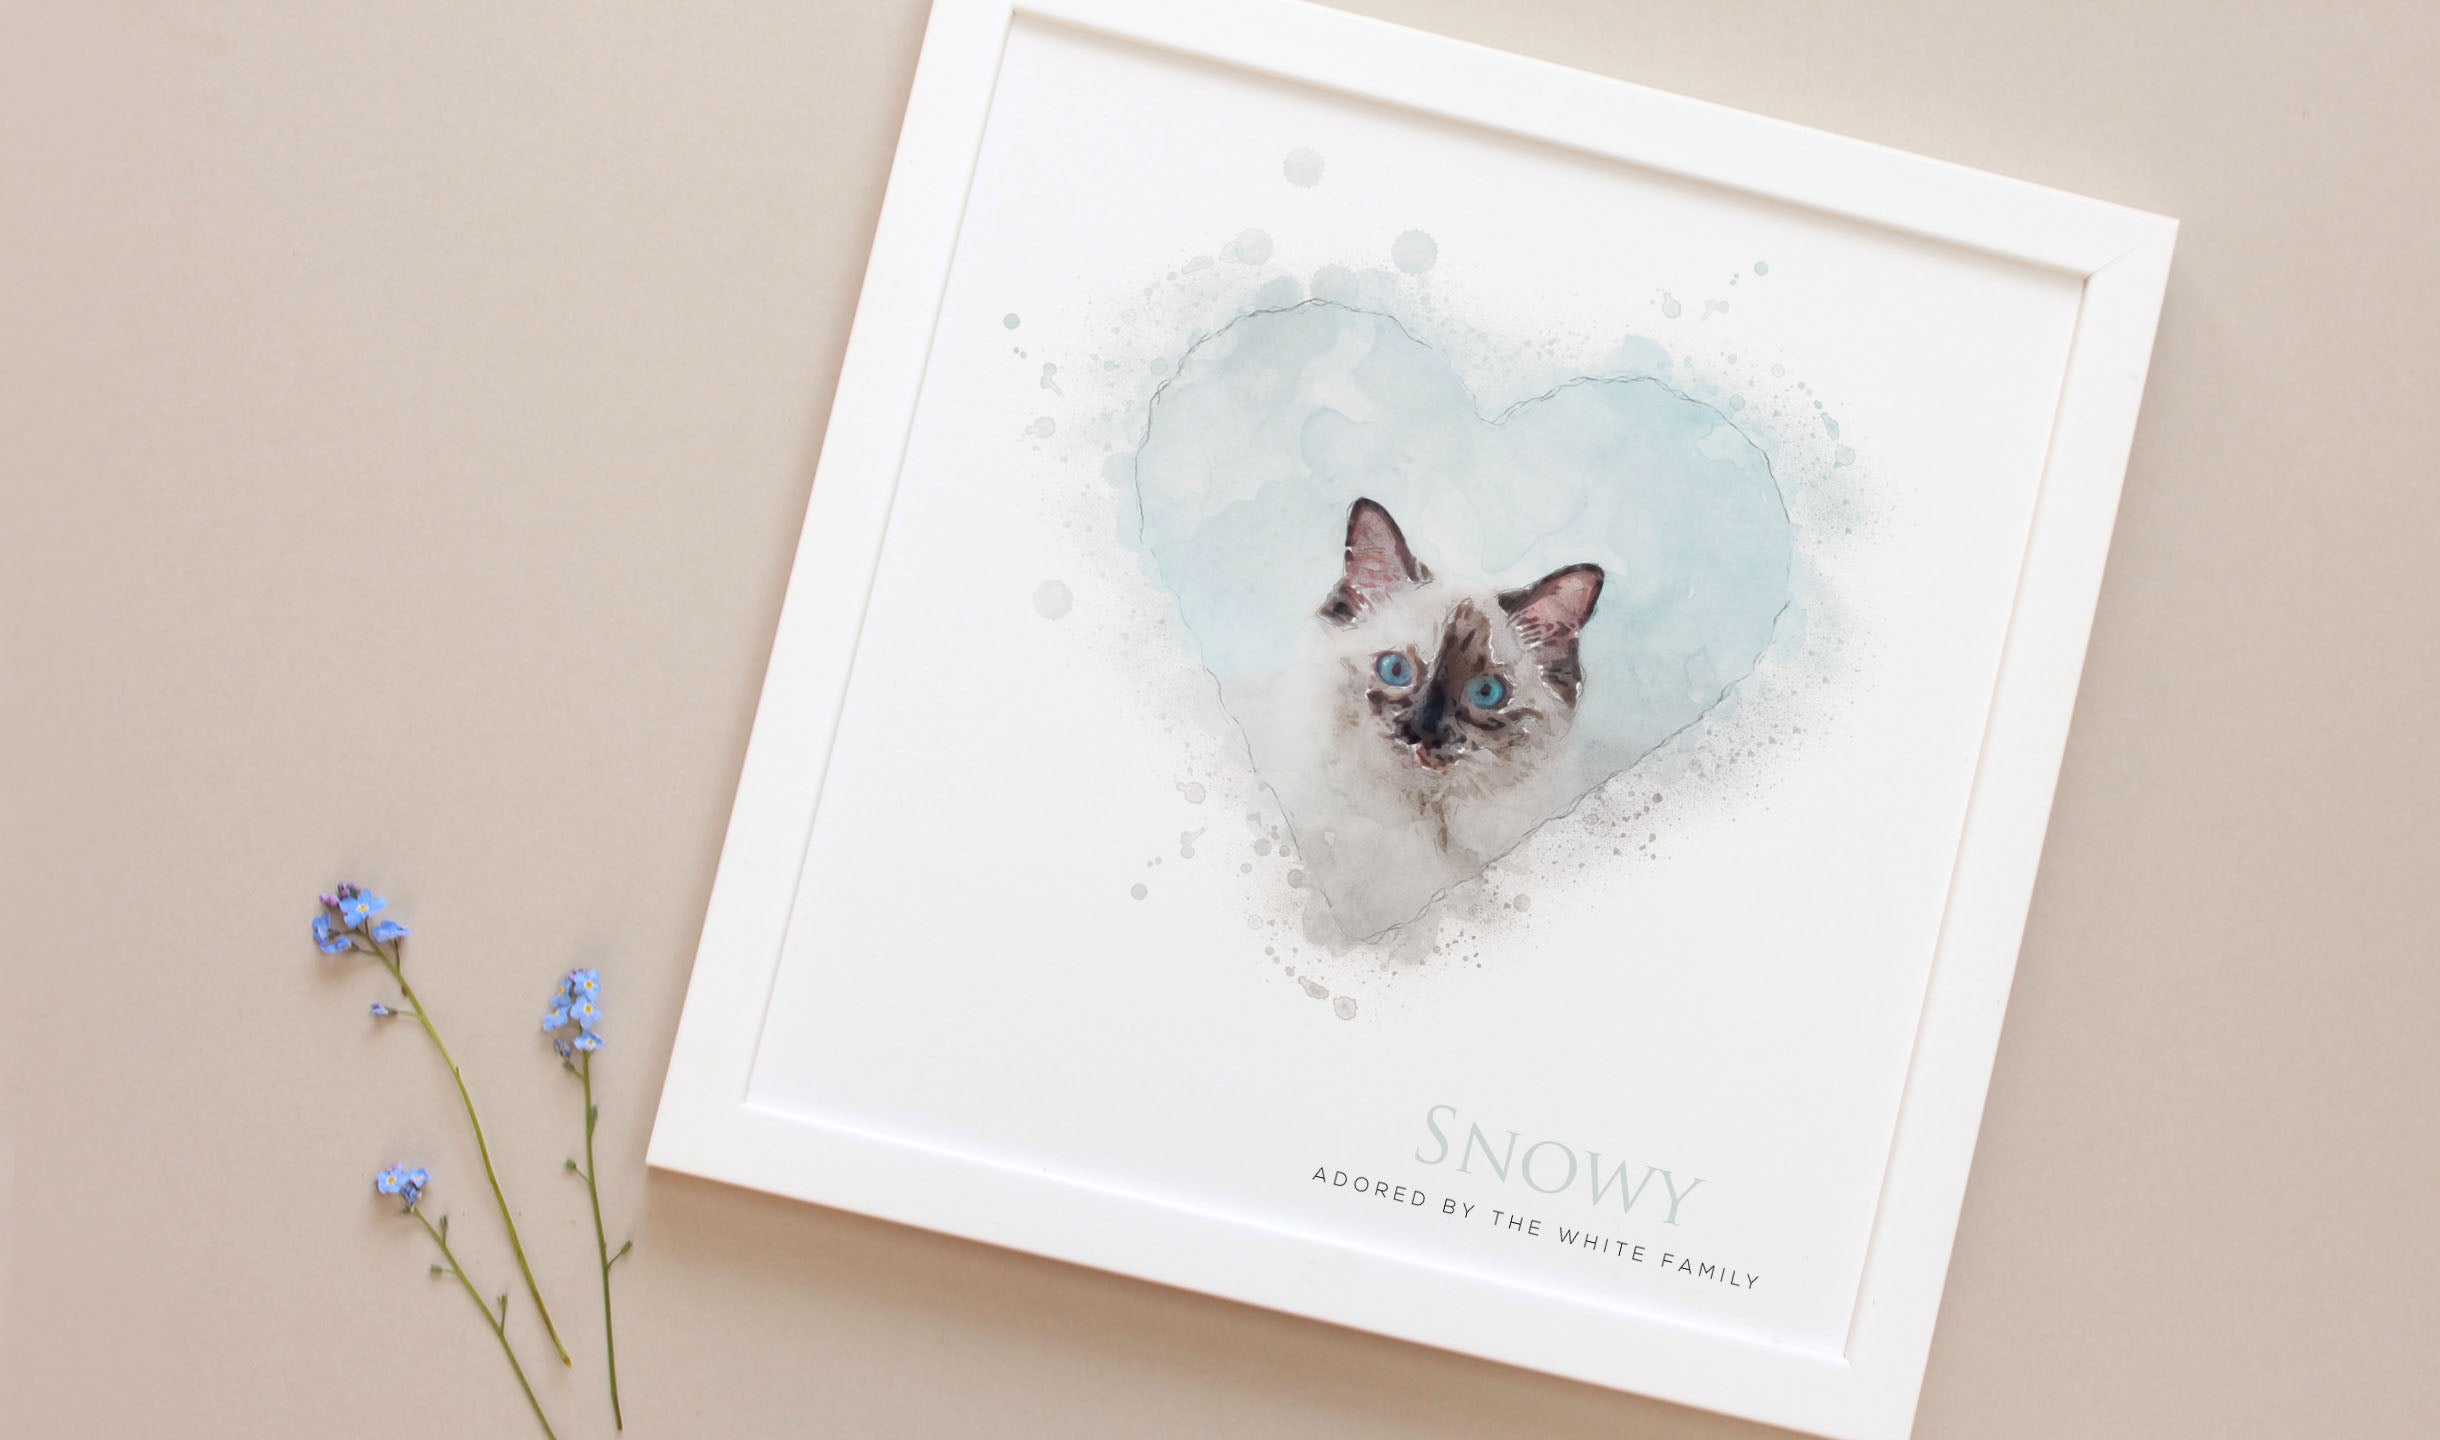 birdyhome cat portrait gift in a white frame